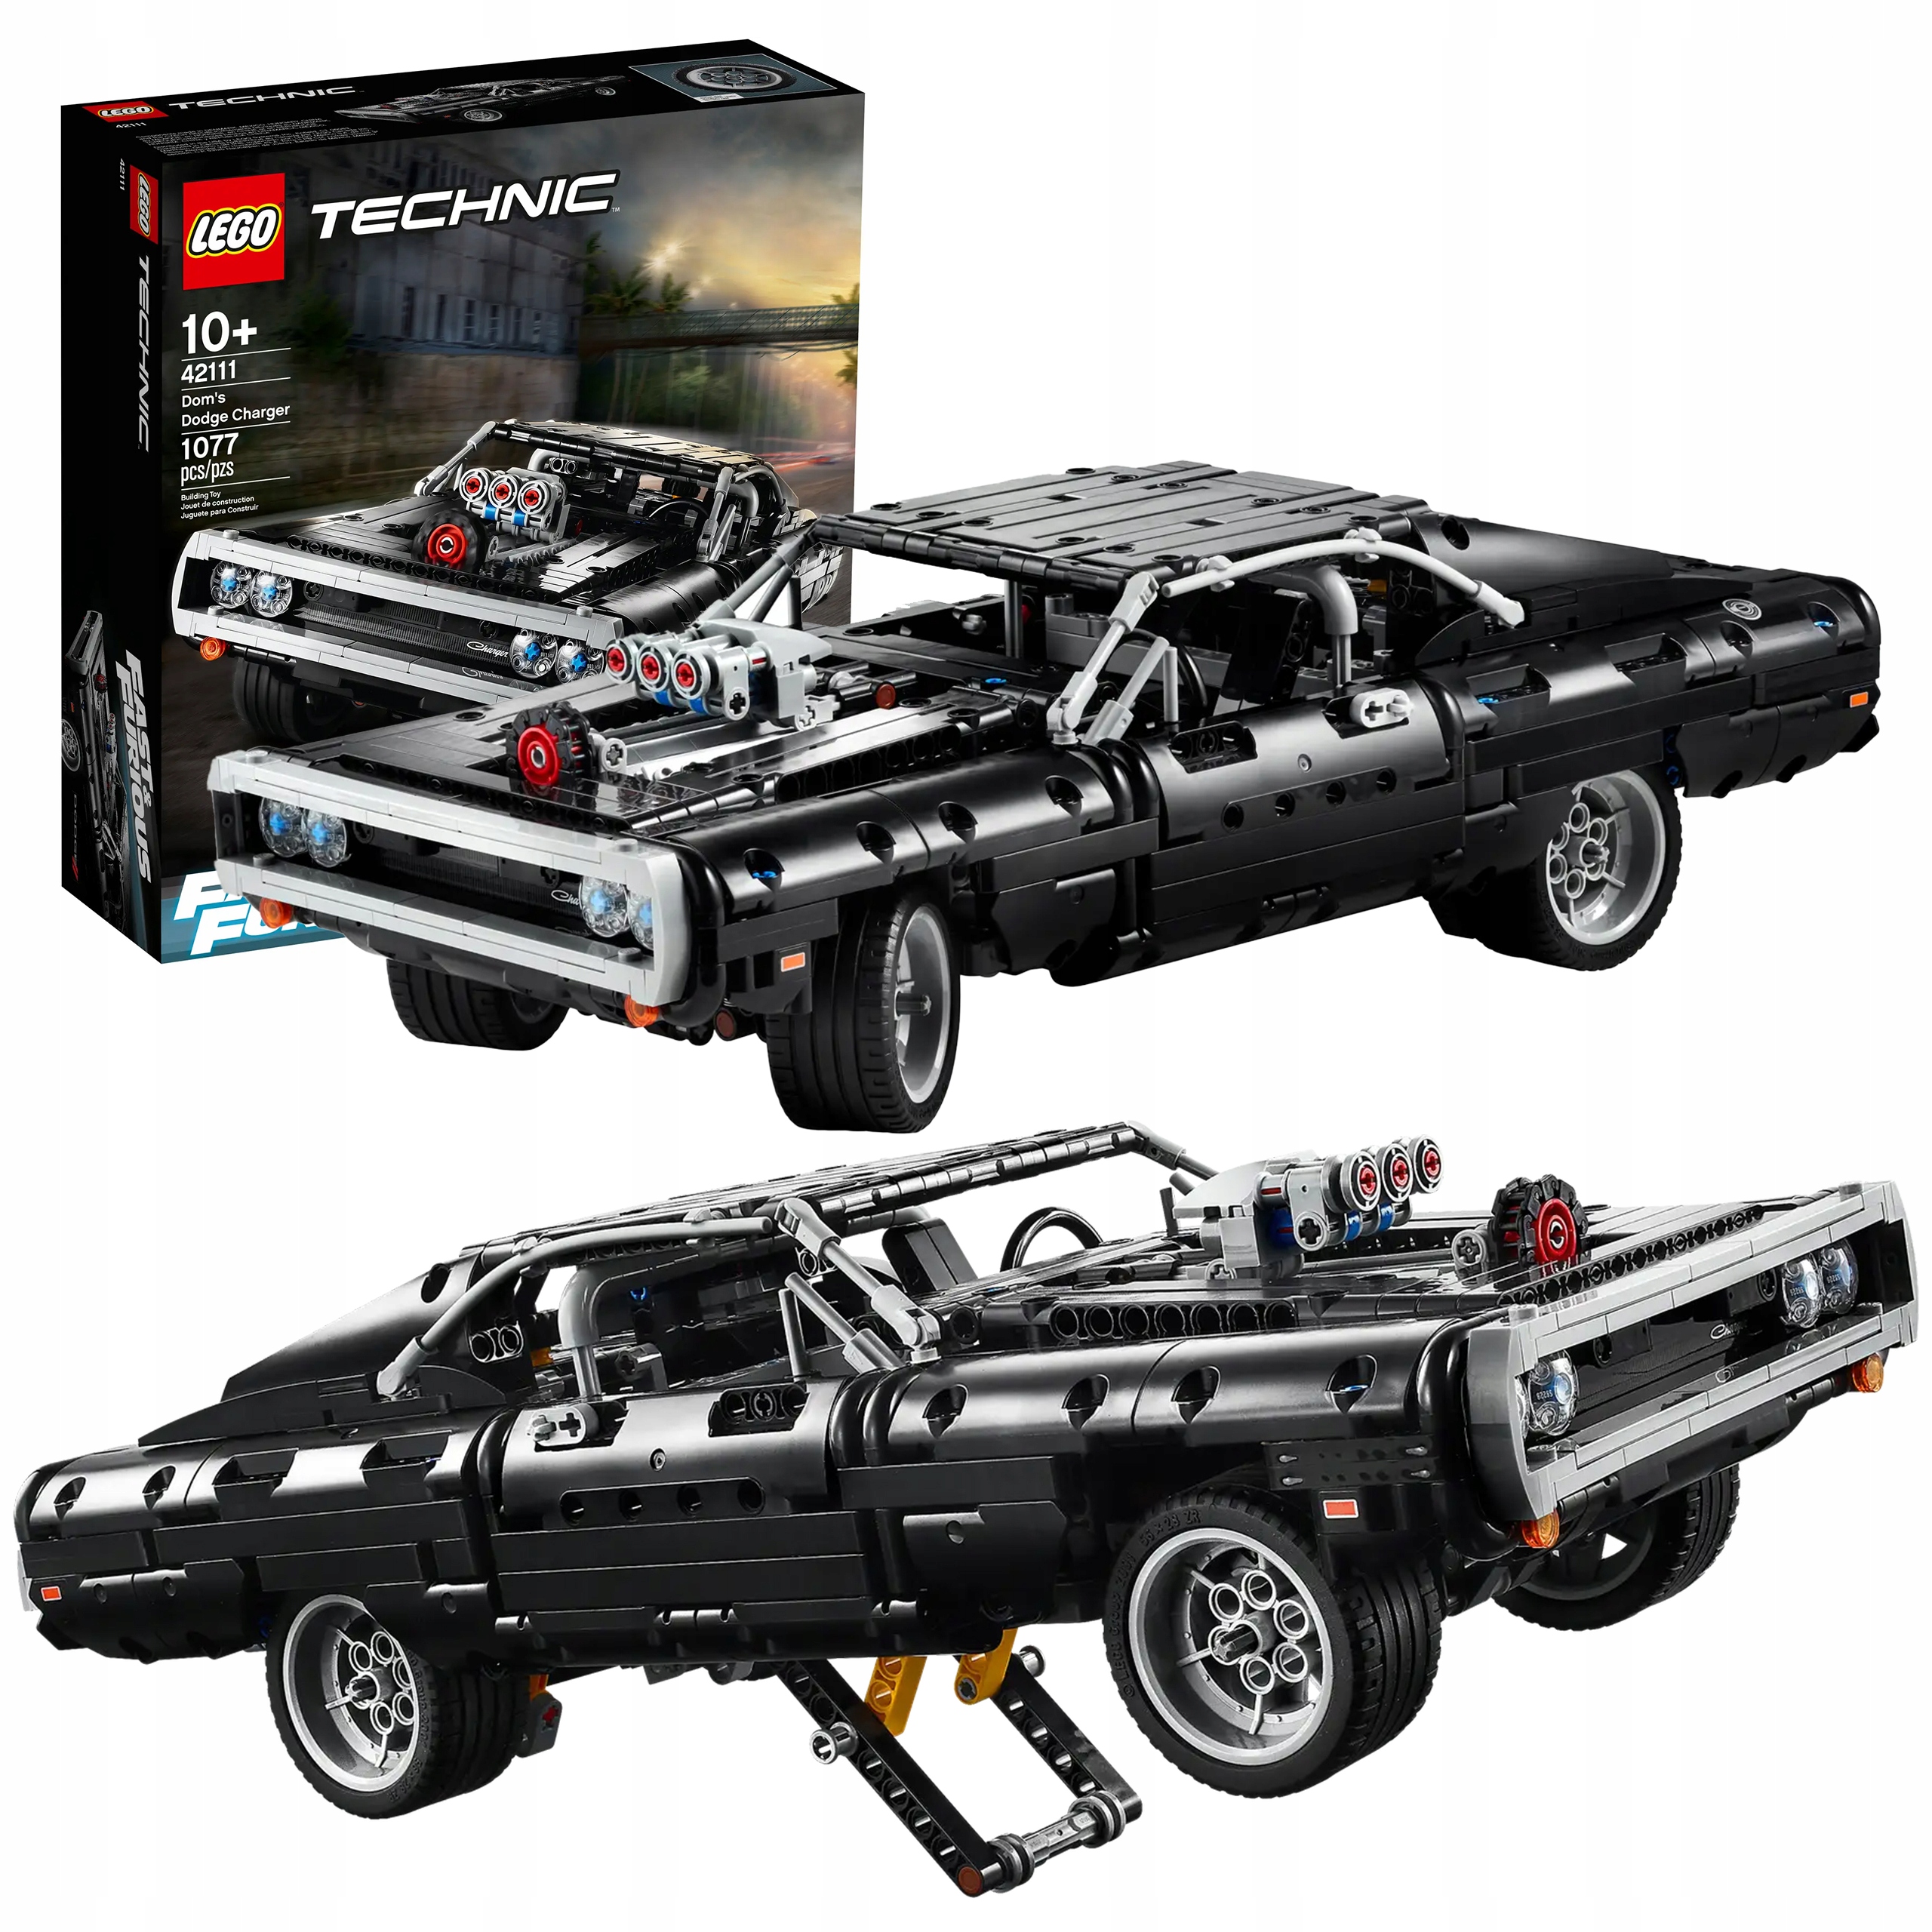 Lego Technic 42111 Dom's Dodge Charger Fast & Furious